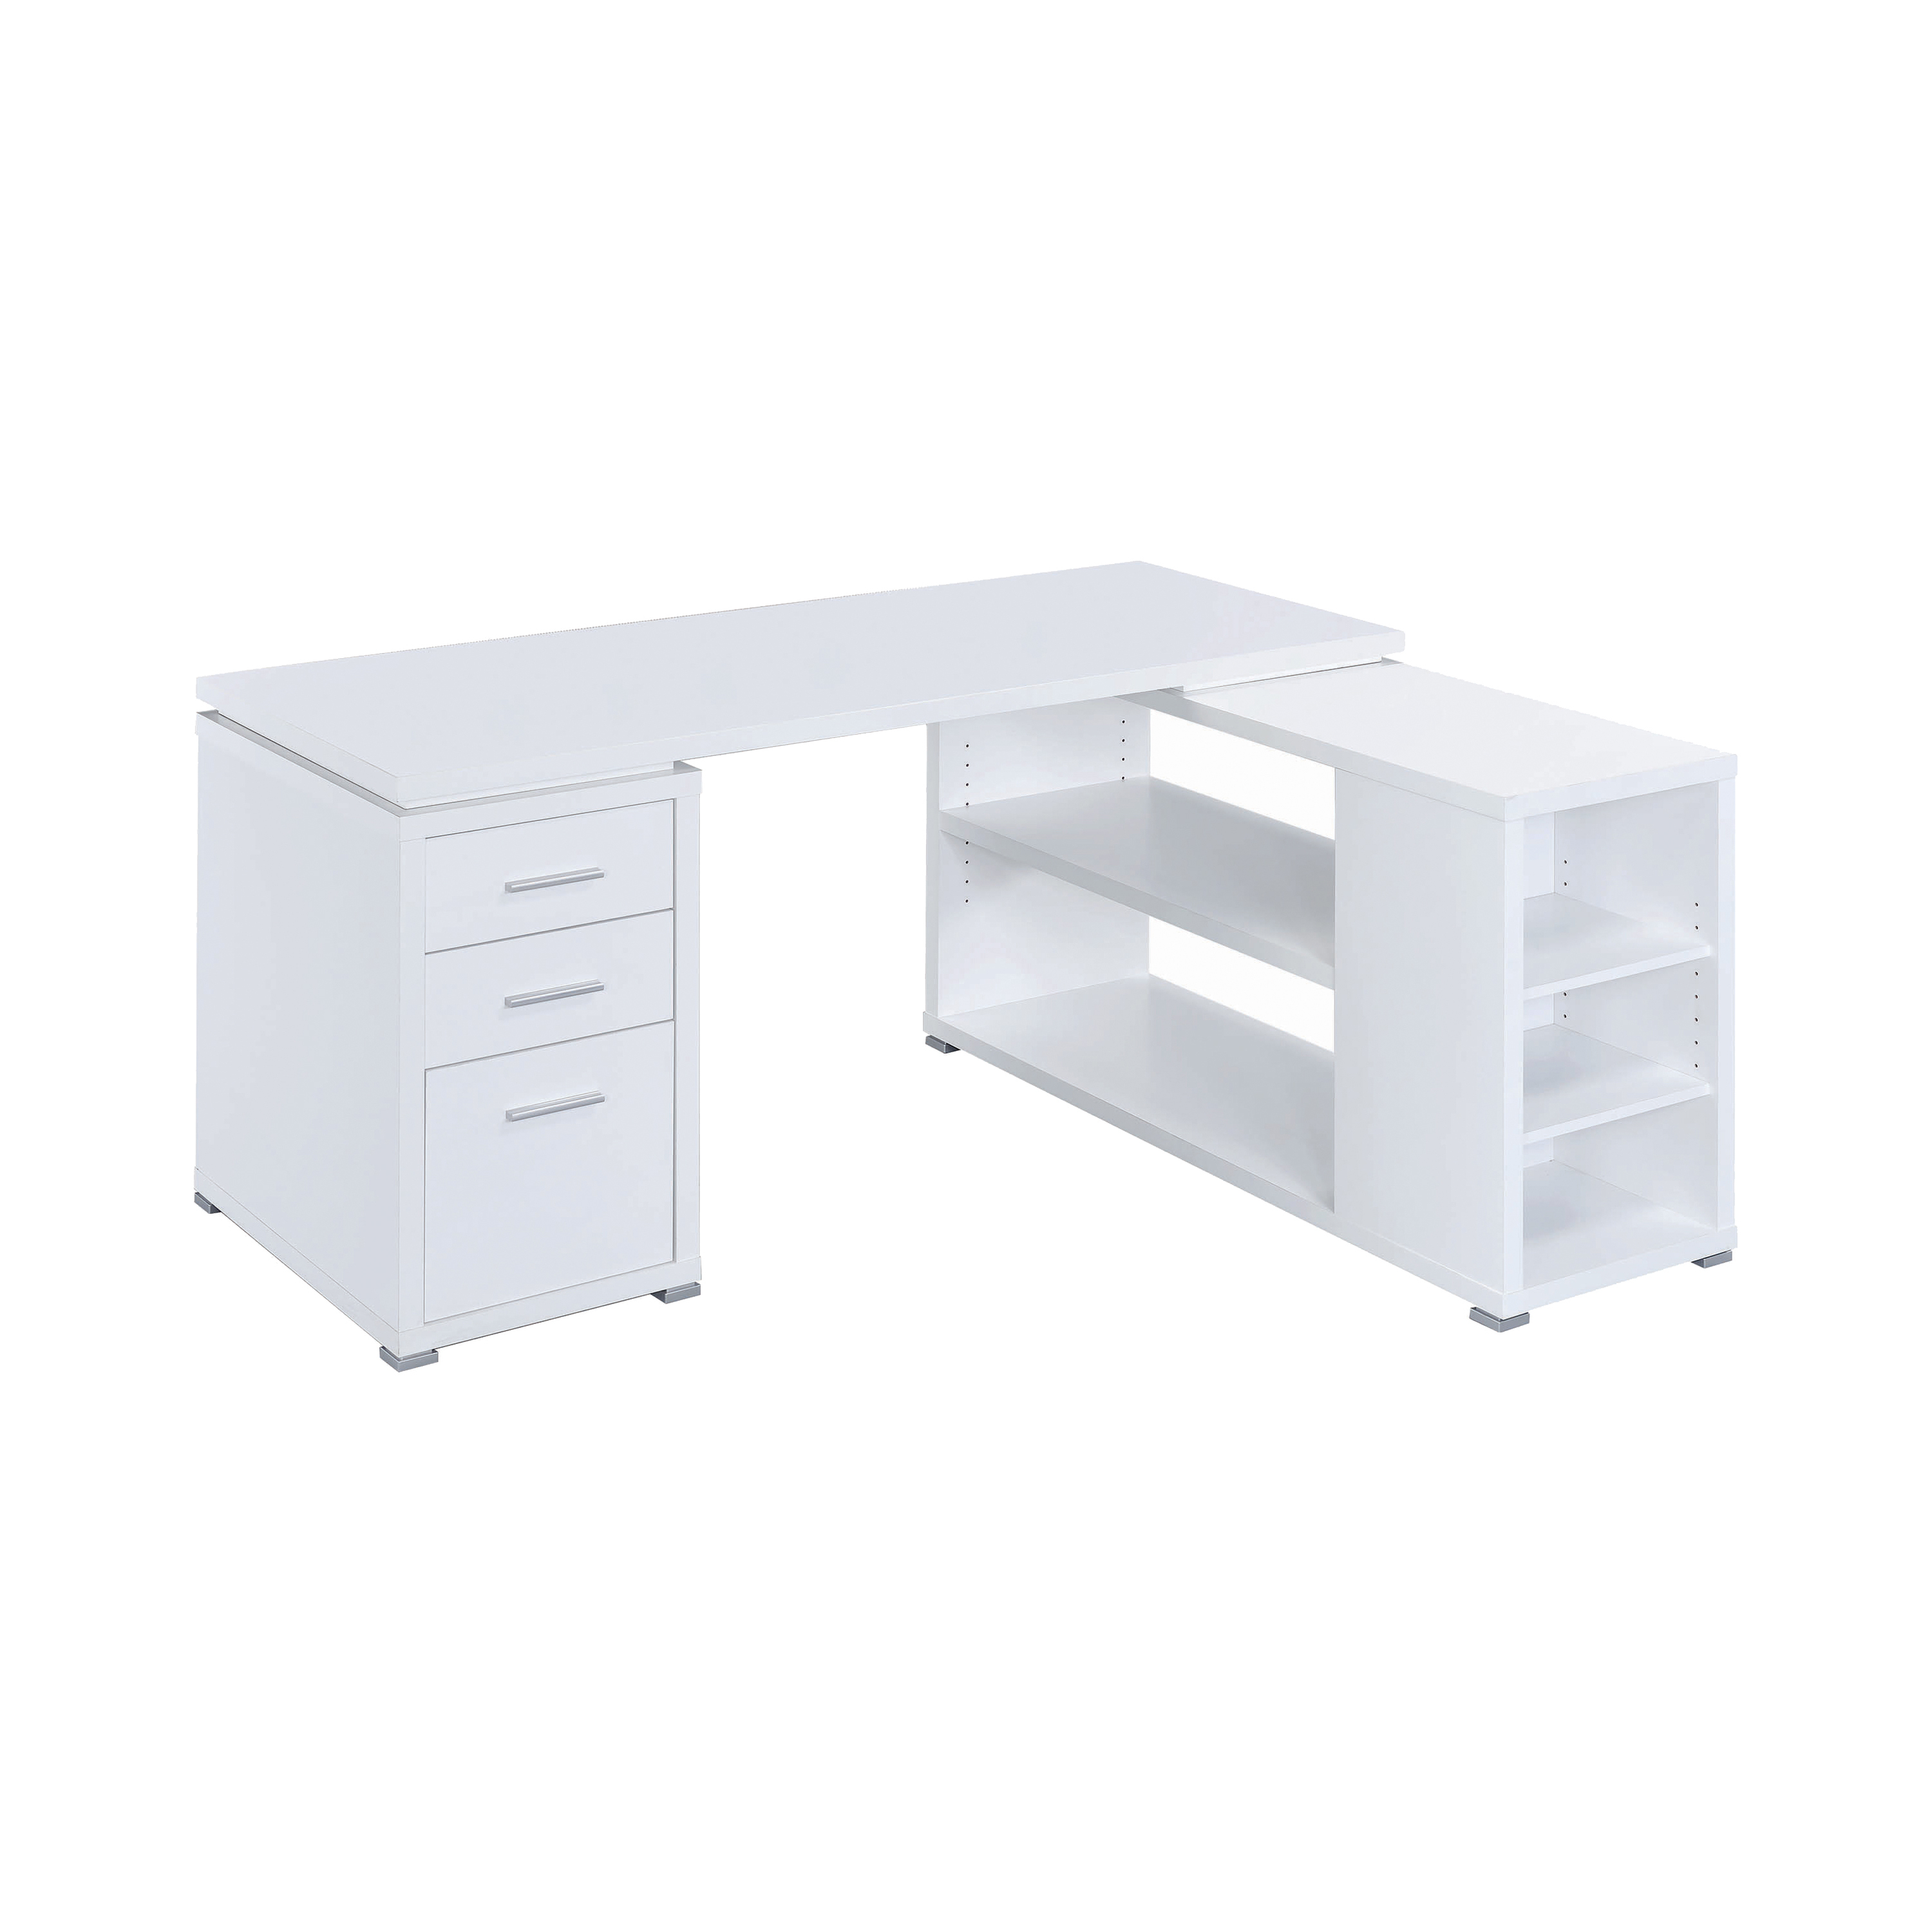 Contemporary L Shaped Office Desk With 3 Drawers And Shelves, White- Saltoro Sherpi